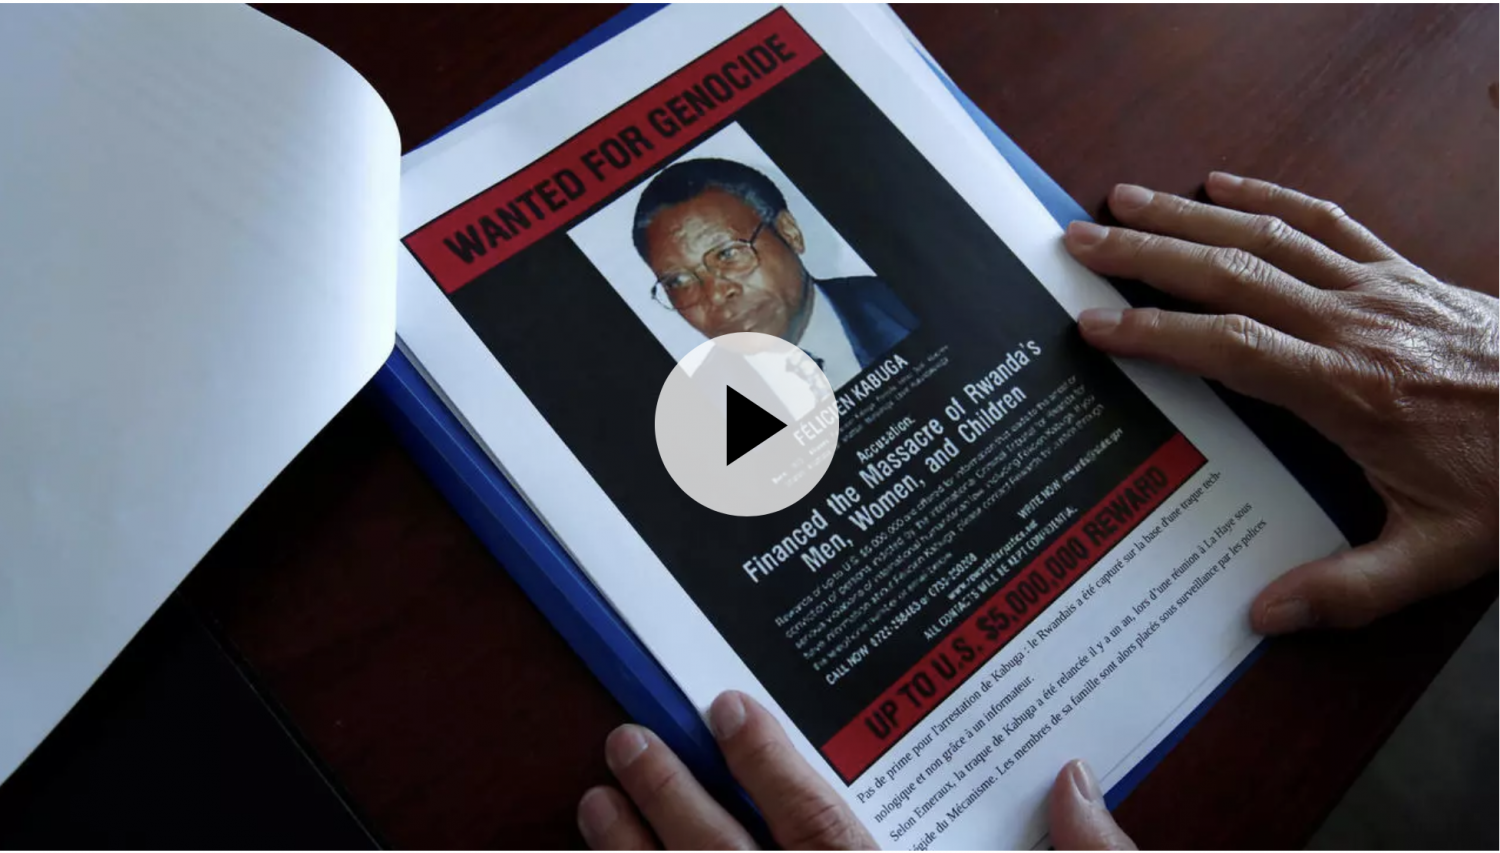 A wanted poster with a photograph of Felicien Kabuga is displayed at the French Gendarmerie's Central Office for Combating Crimes Against Humanity, Genocides and War Crimes (OCLCH) in Paris on May 19, 2020. © Benoît Tessier, REUTERS